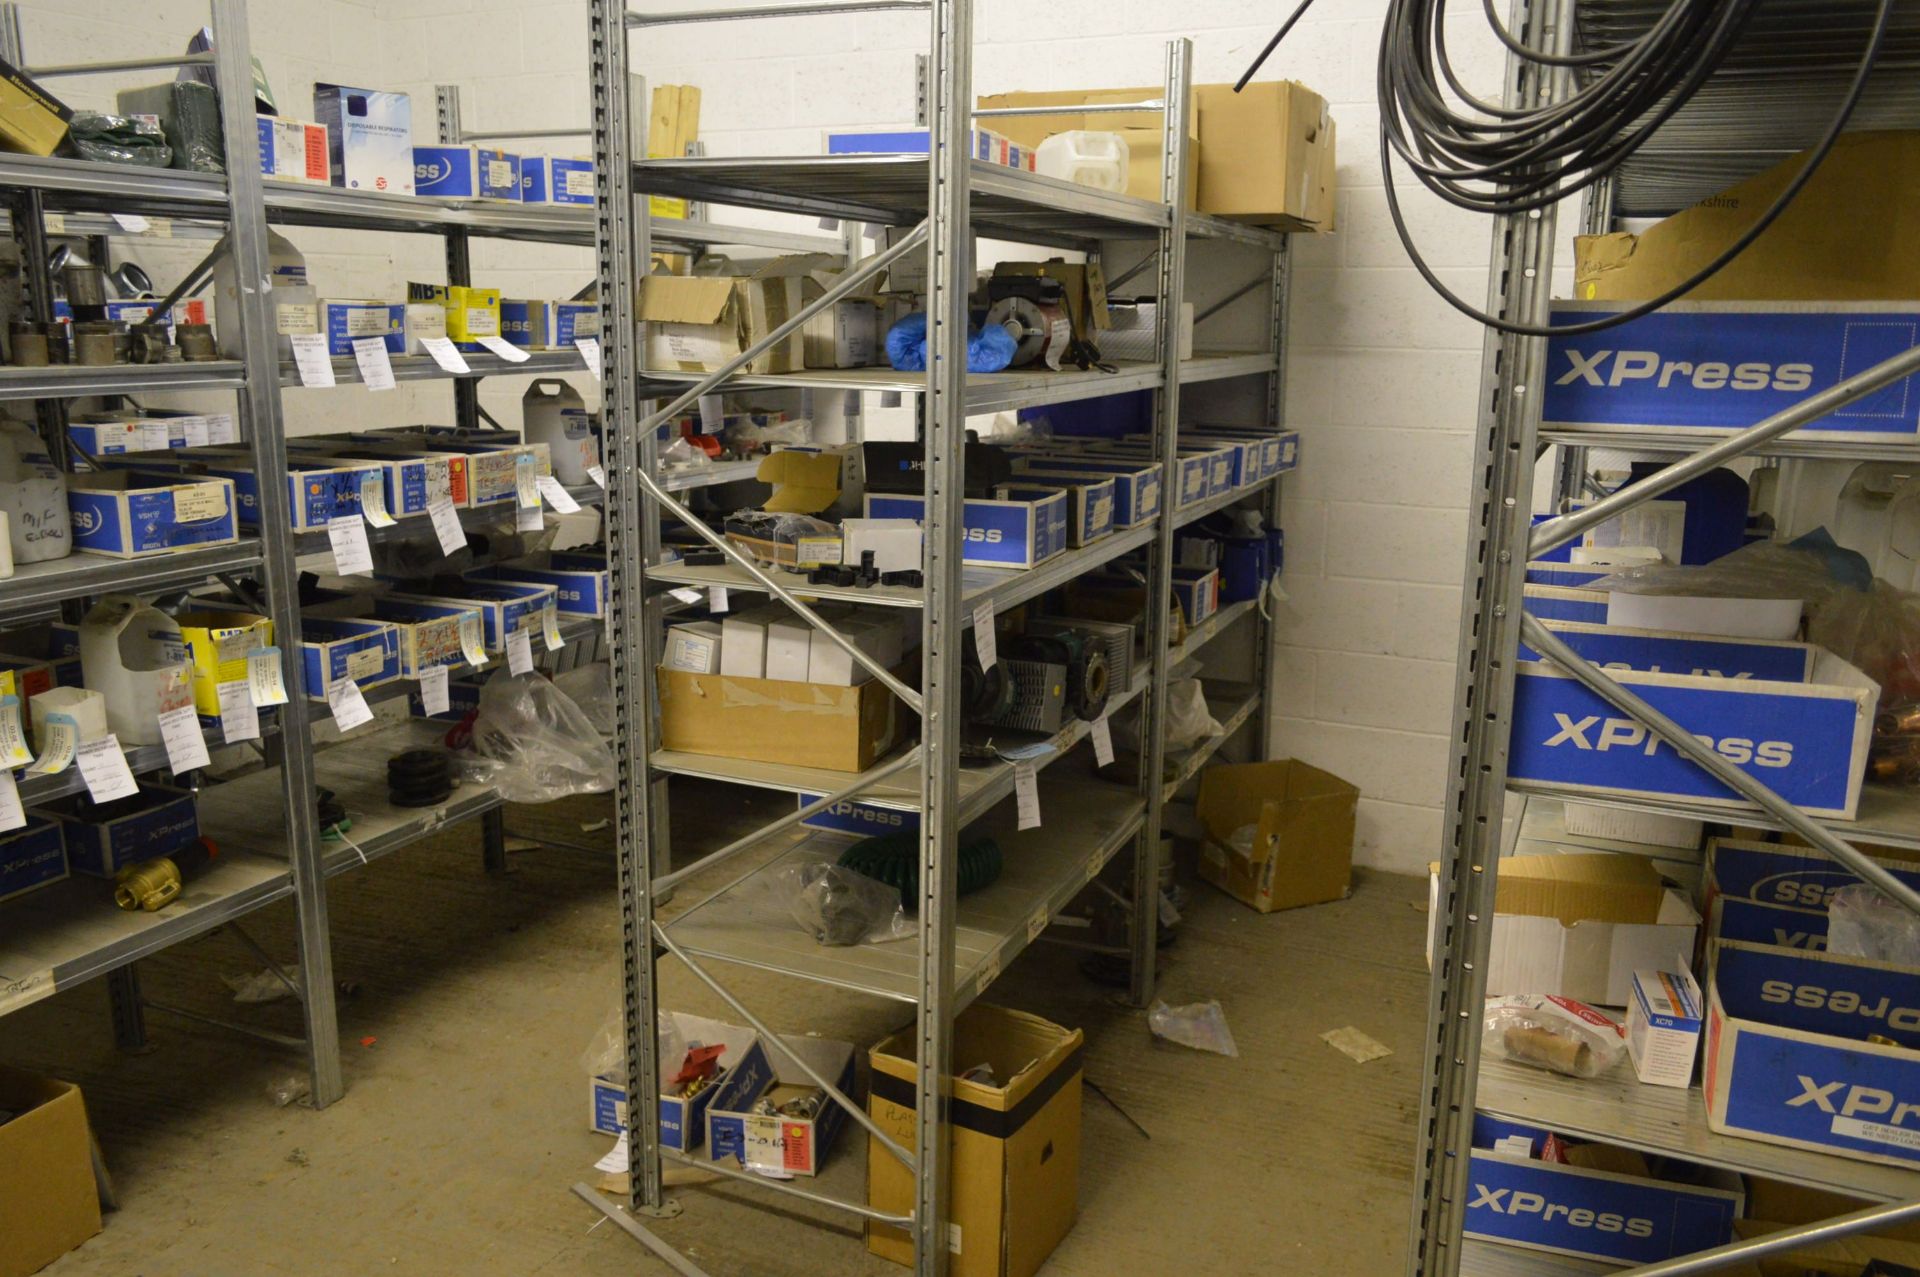 Nine Galvanised Steel Multi-Tier Stock Racks (reserve removal until contents cleared) - Image 2 of 5